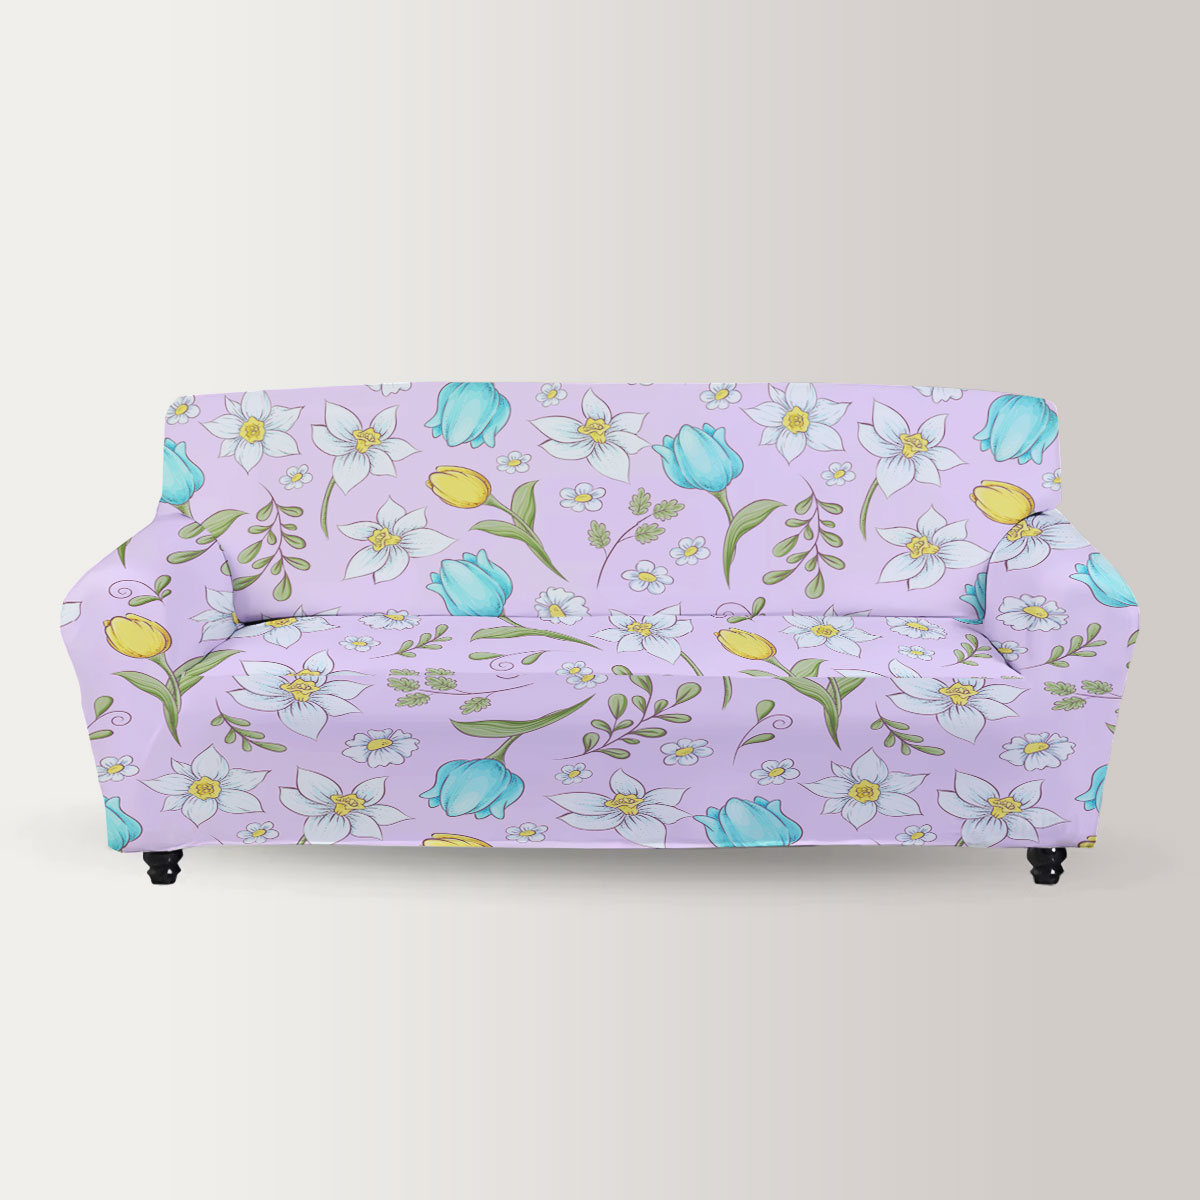 Seamless Pattern Of Daffodils Tulips Sofa Cover